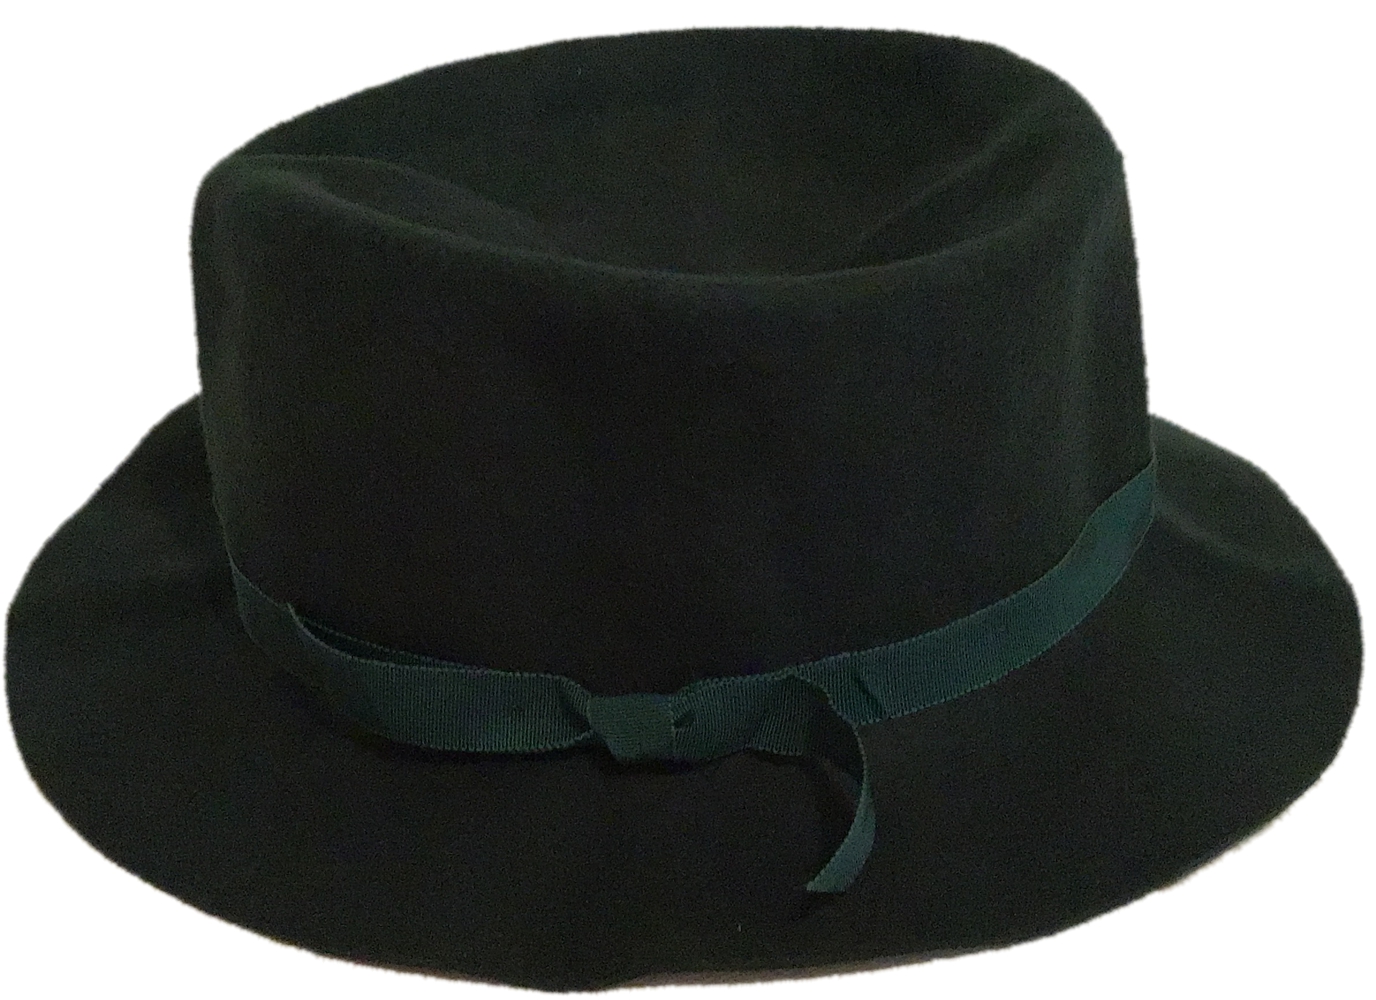 Authentic Rolled Wool Maine Crusher Hat (Hunter Green, Large (7 3/8))